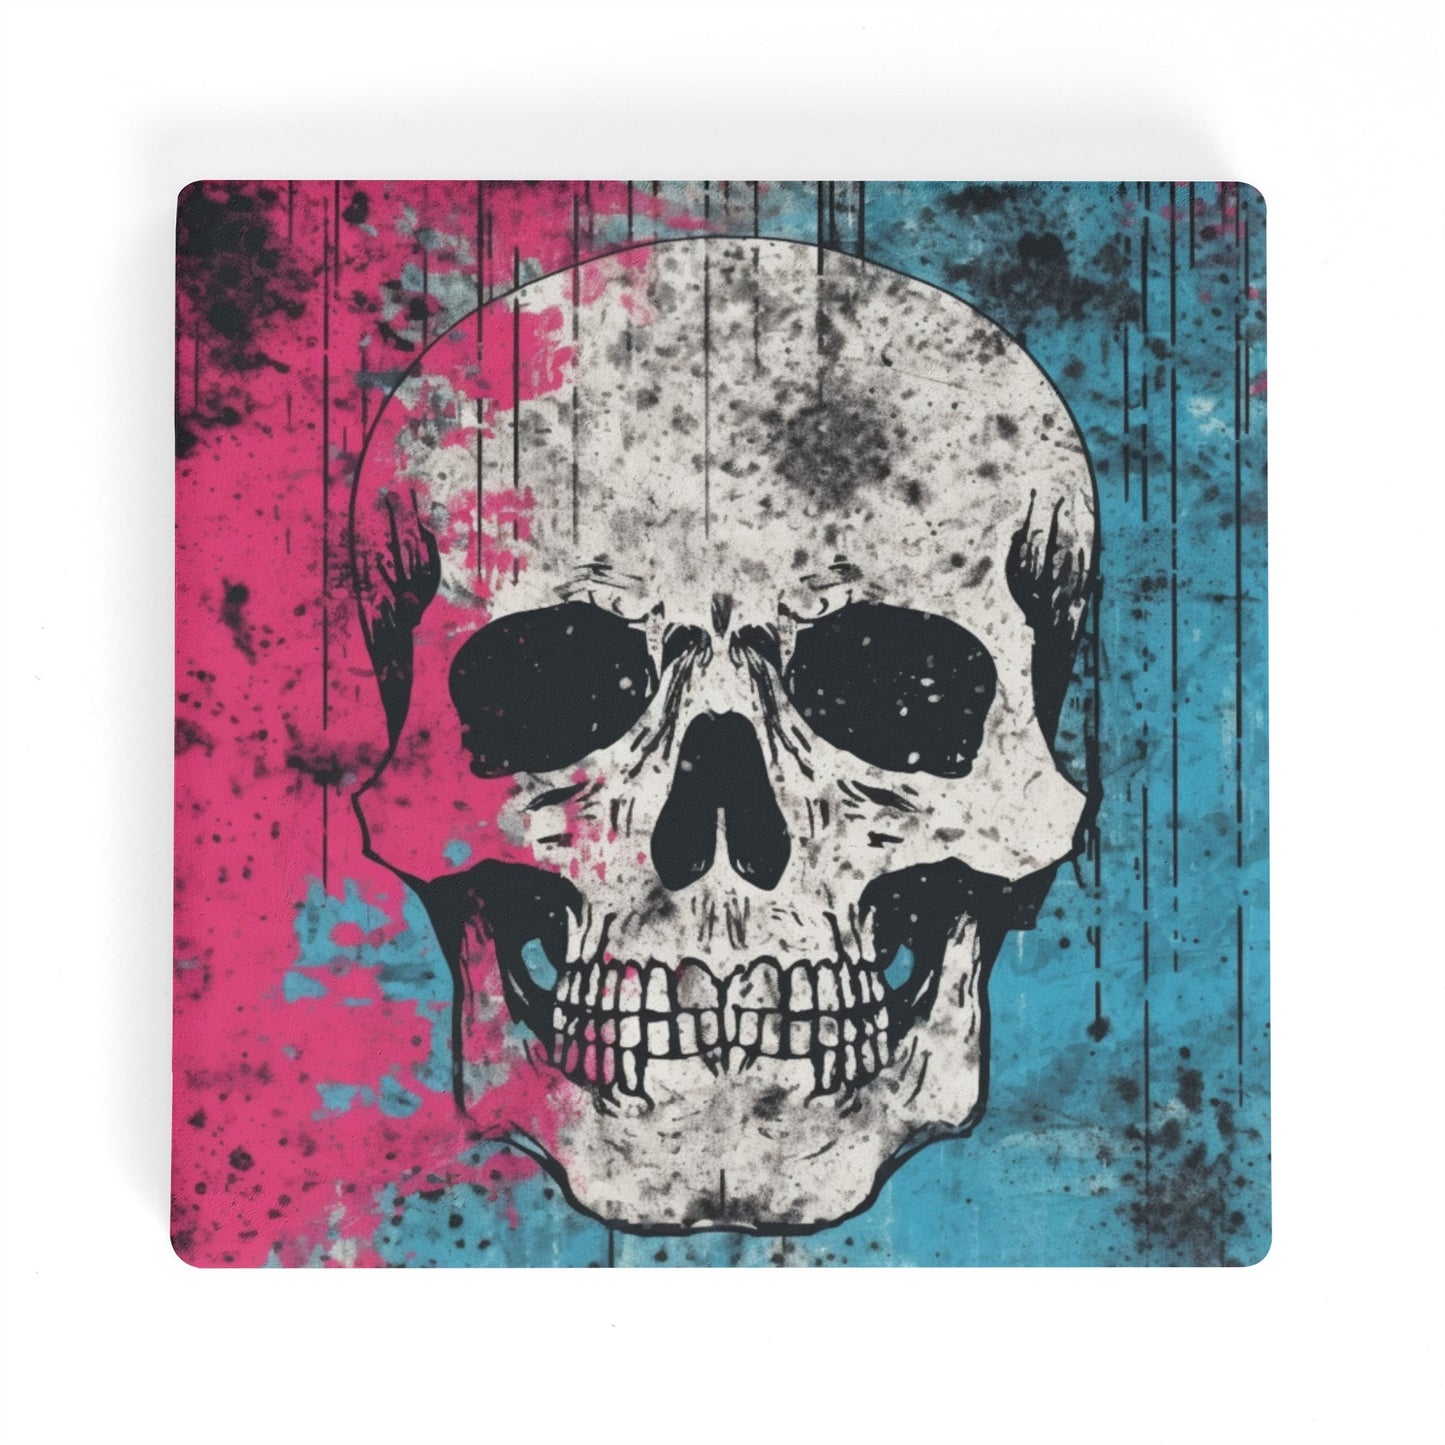 Blue And Pink Skull Square Ceramic Coasters (4 Pack)